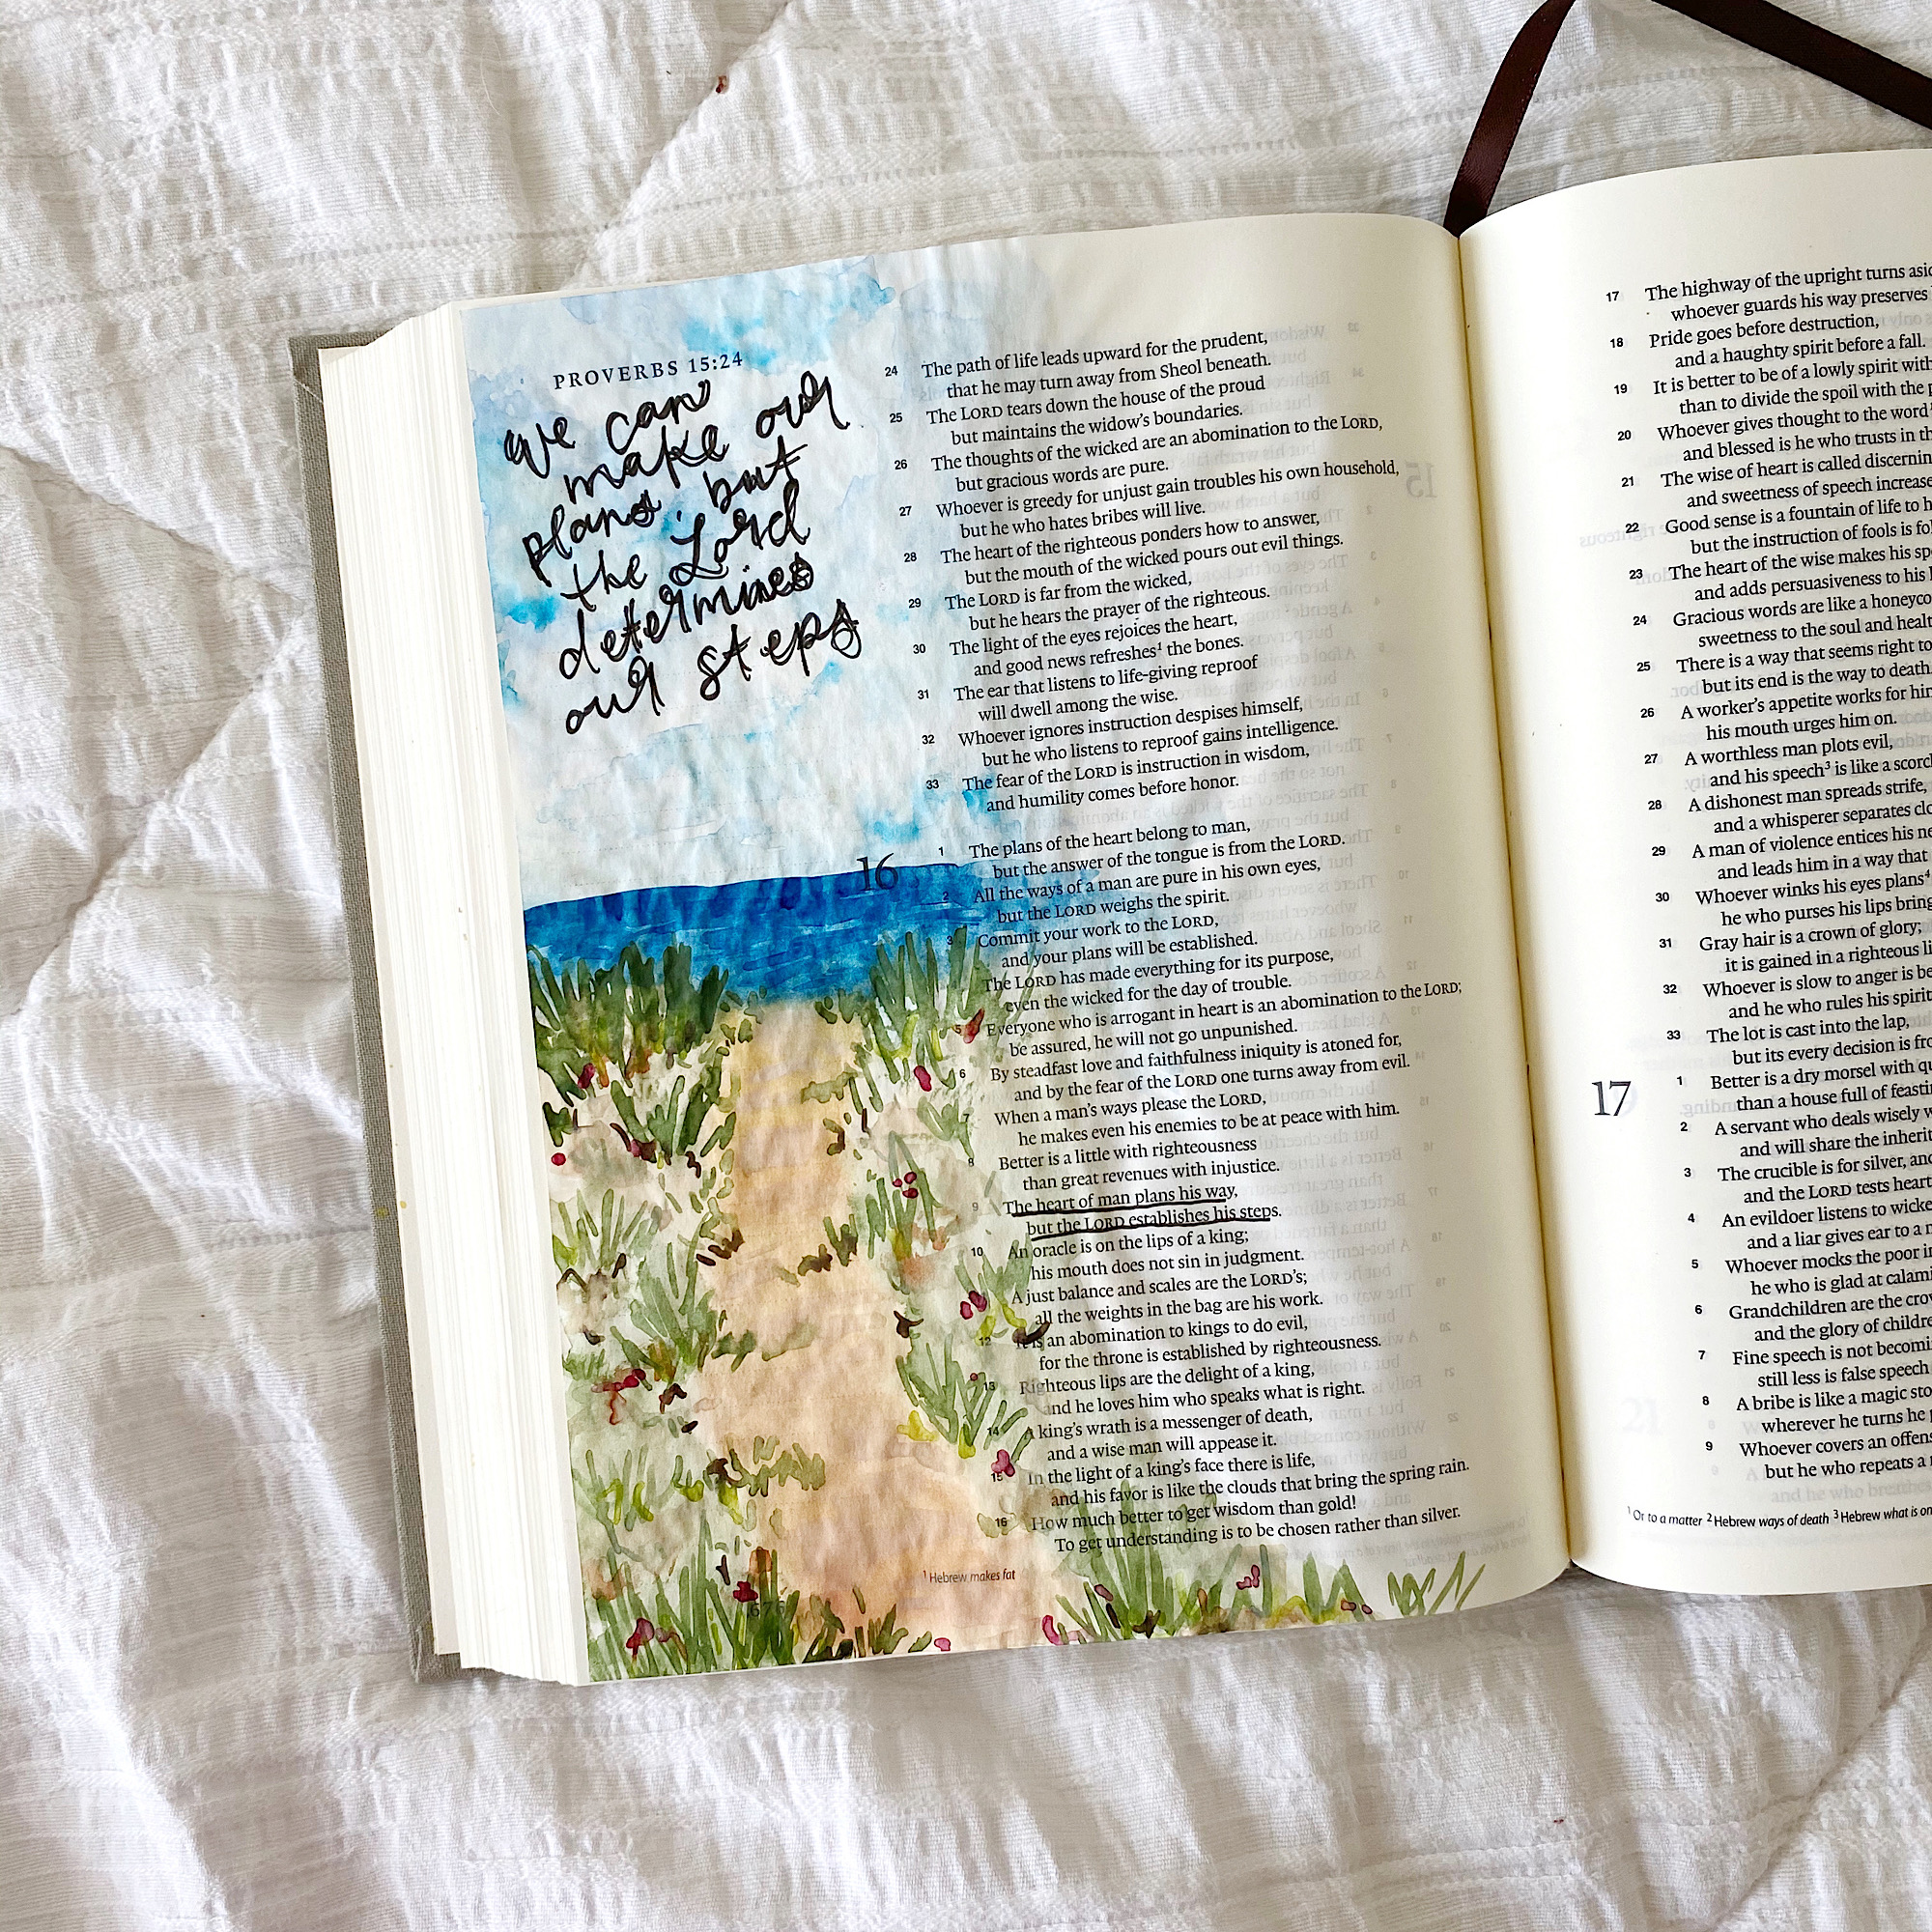 Painting A Pathway/ Walkway To The Beach- Bible Journaling With Me. Proverbs 16:9